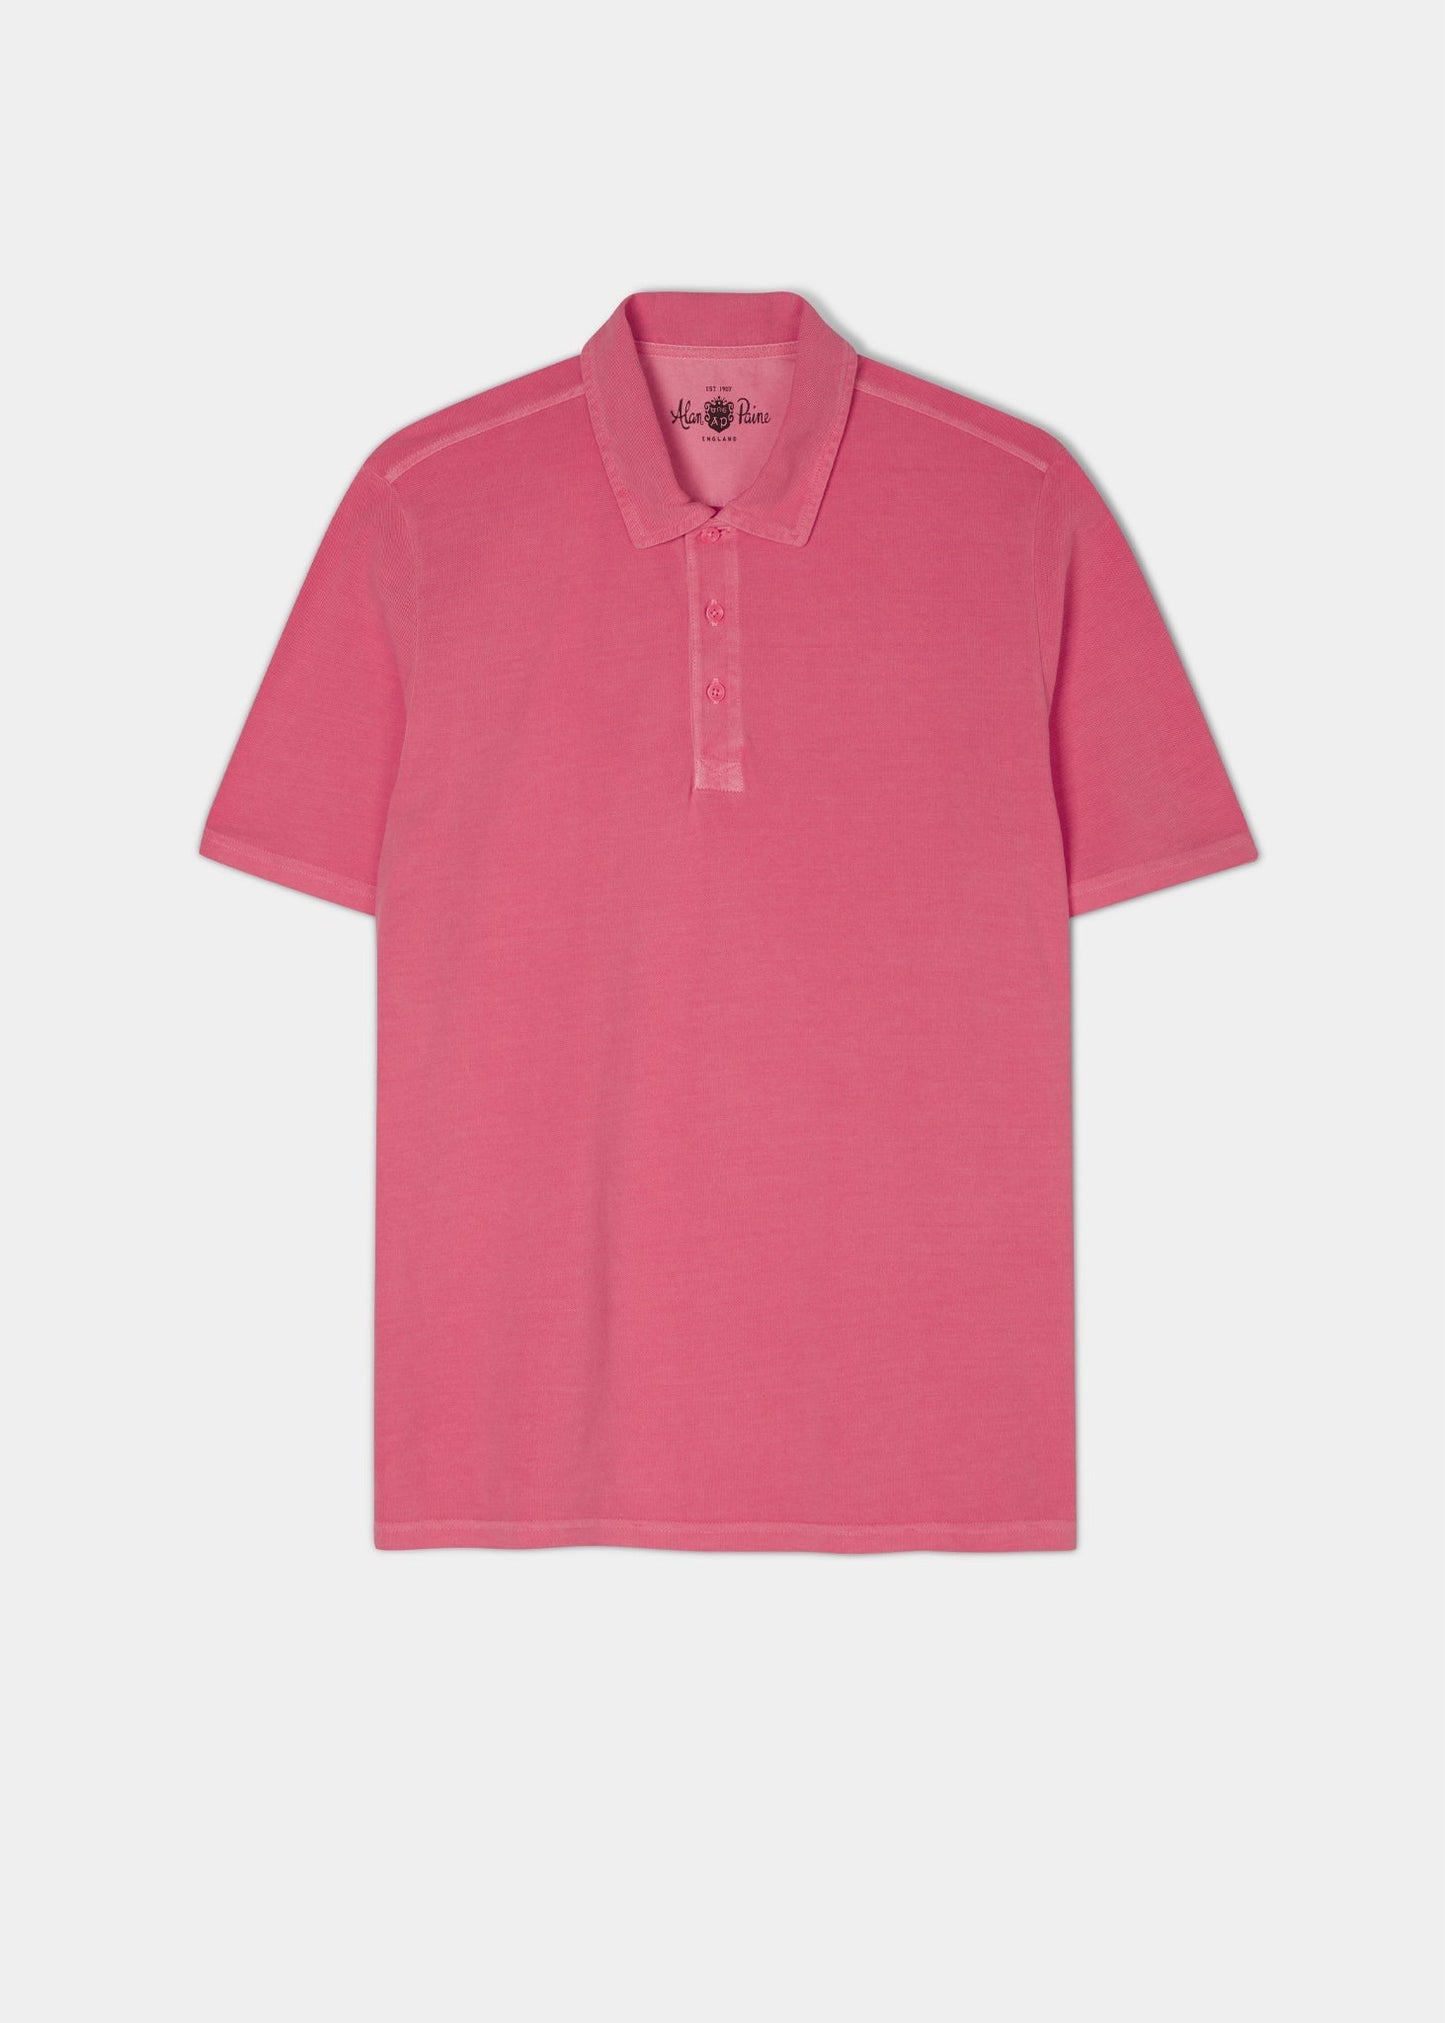 calypso pink polo shirt with short sleeves made from 100% preuvian cotton.